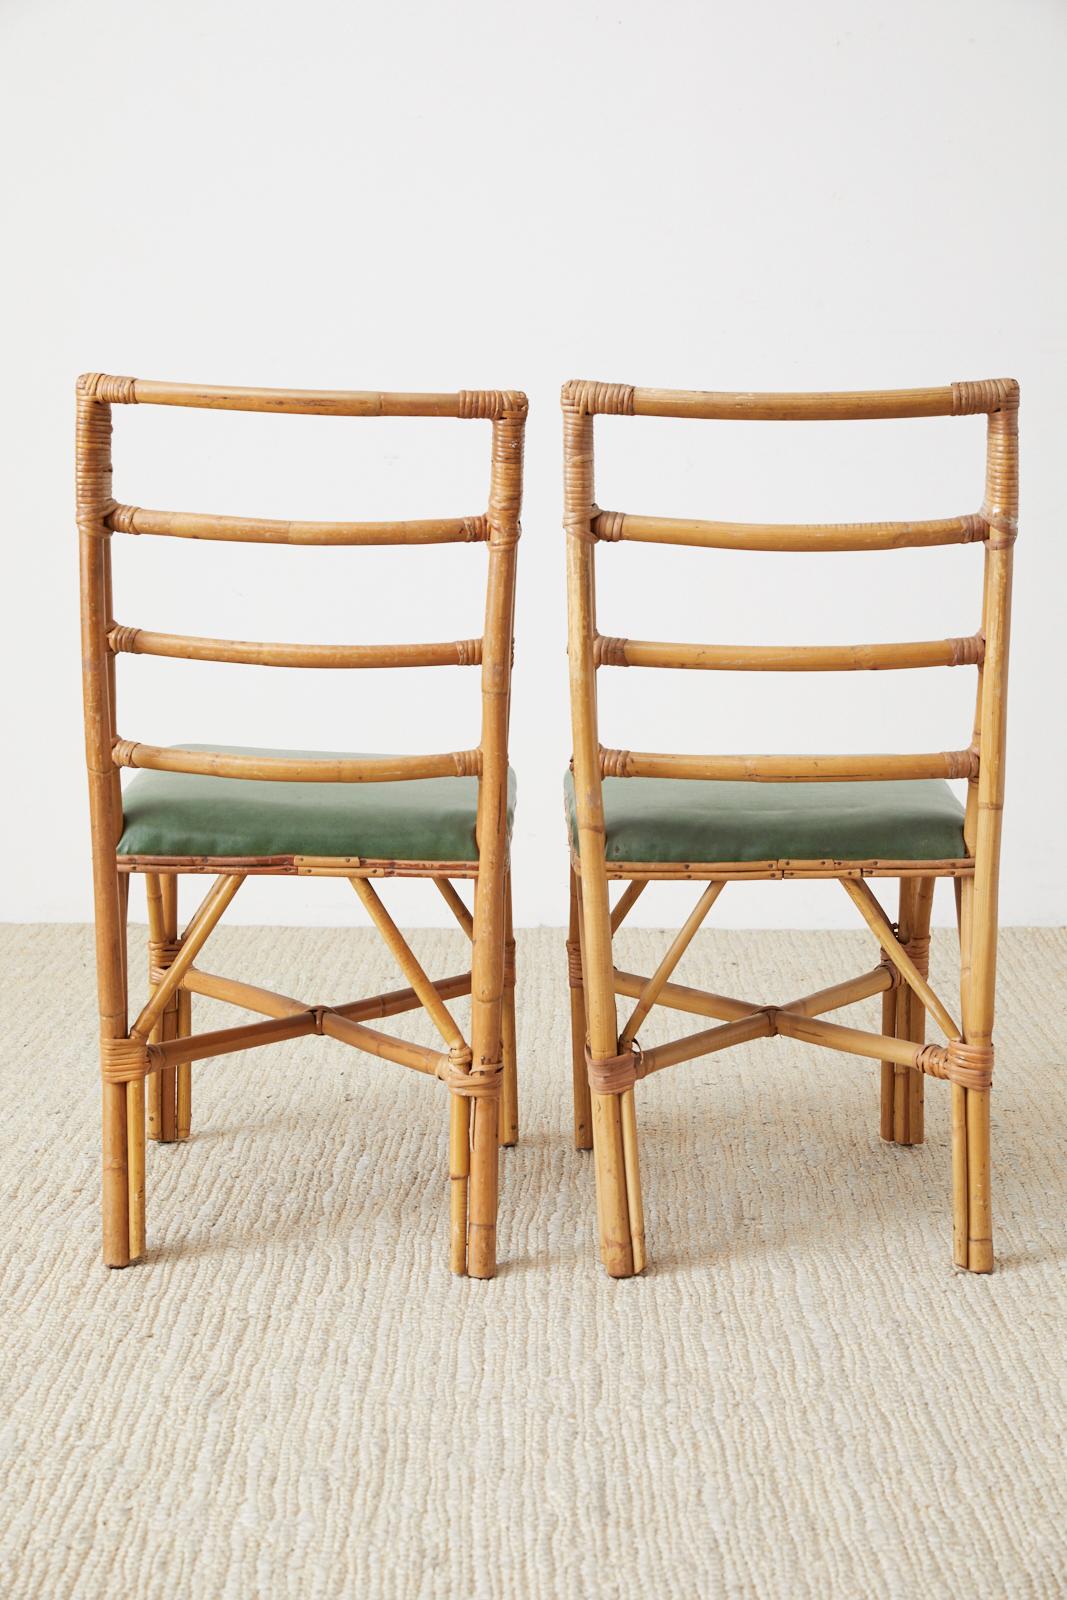 Set of Four Midcentury Bamboo Rattan Dining Chairs 8